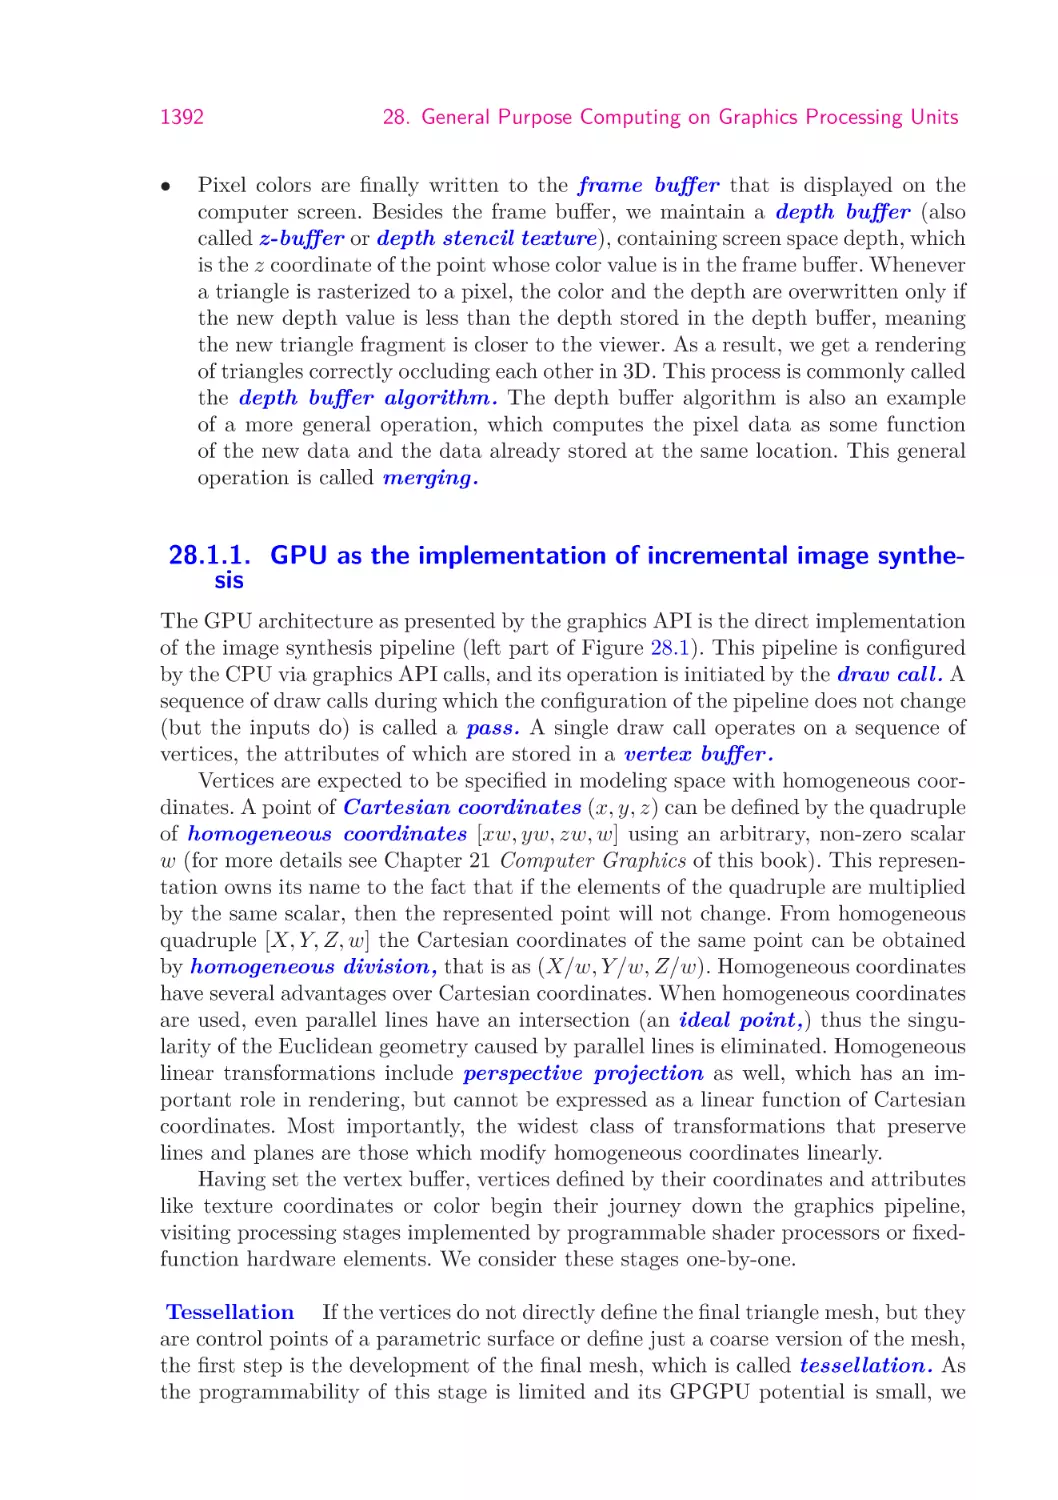 28.1.1.  GPU as the implementation of incremental image synthesis